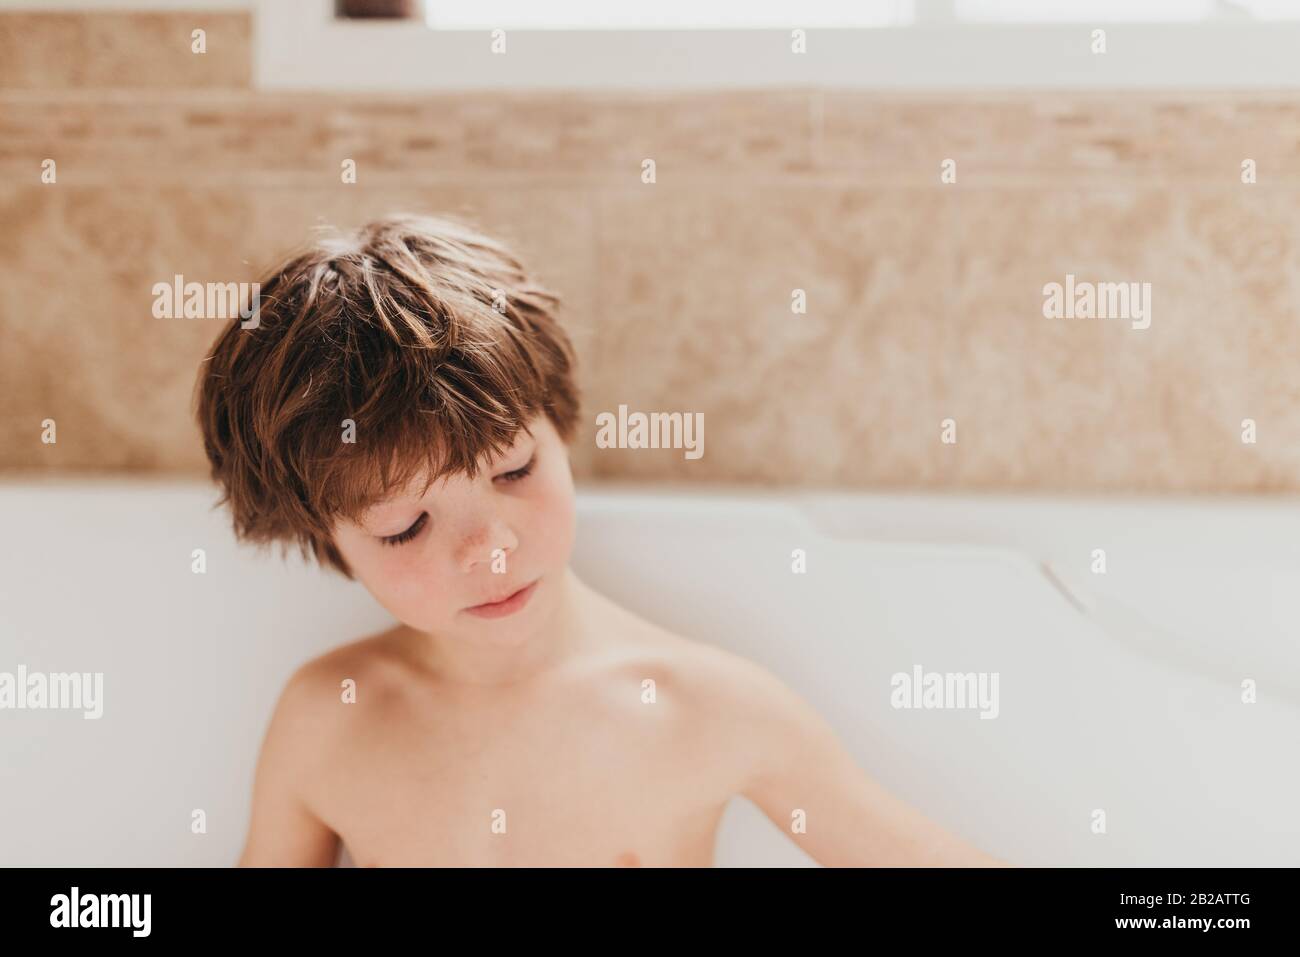 Portrait of a young boy sitting in a bubble bath Stock Photo